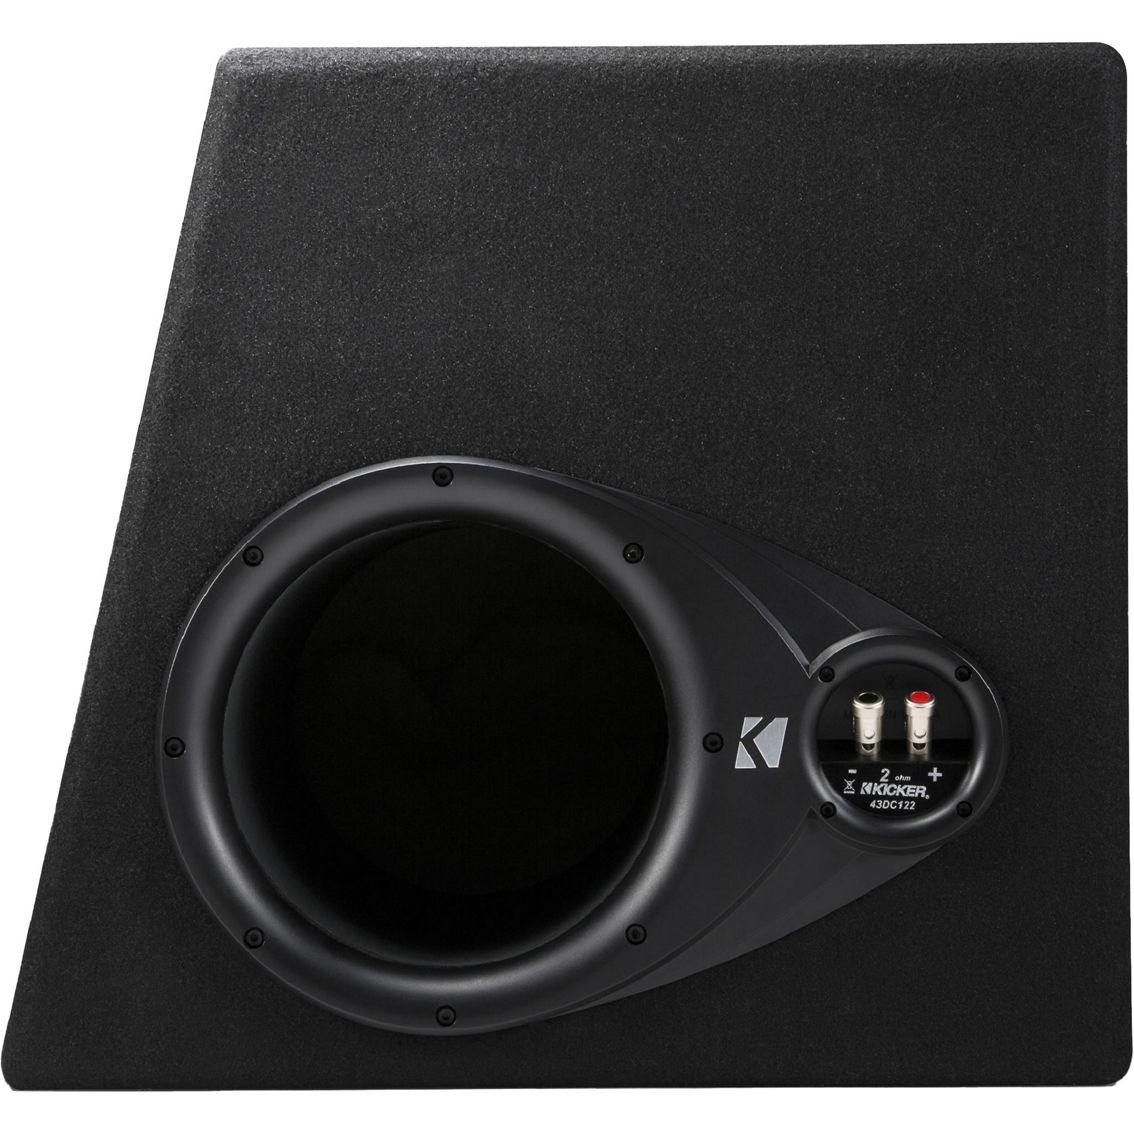 Kicker 43DC122 Ported Enclosure with Dual 12 in. Comp Subwoofers - Image 5 of 5